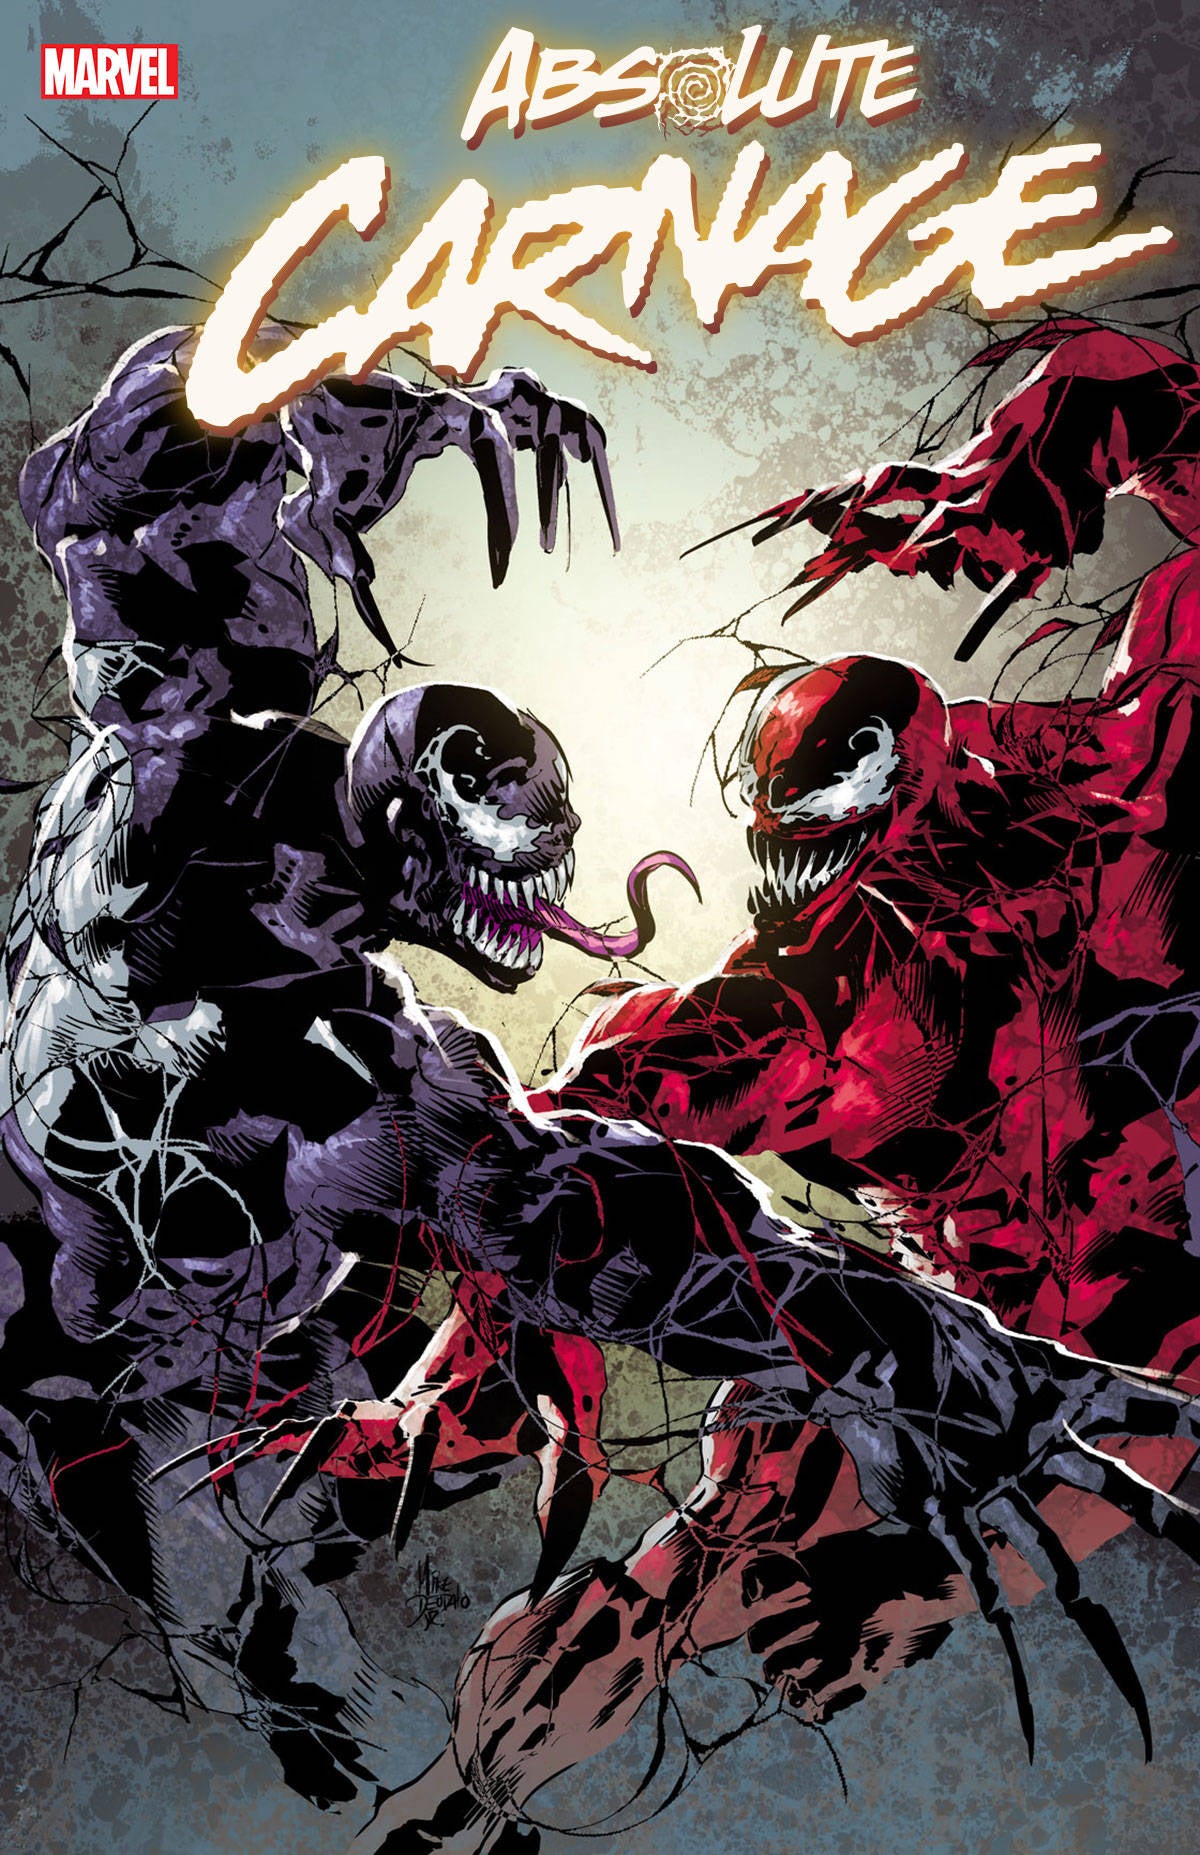 ABSOLUTE CARNAGE #1 (OF 4) DEODATO PARTY VARIANT 08/07/19